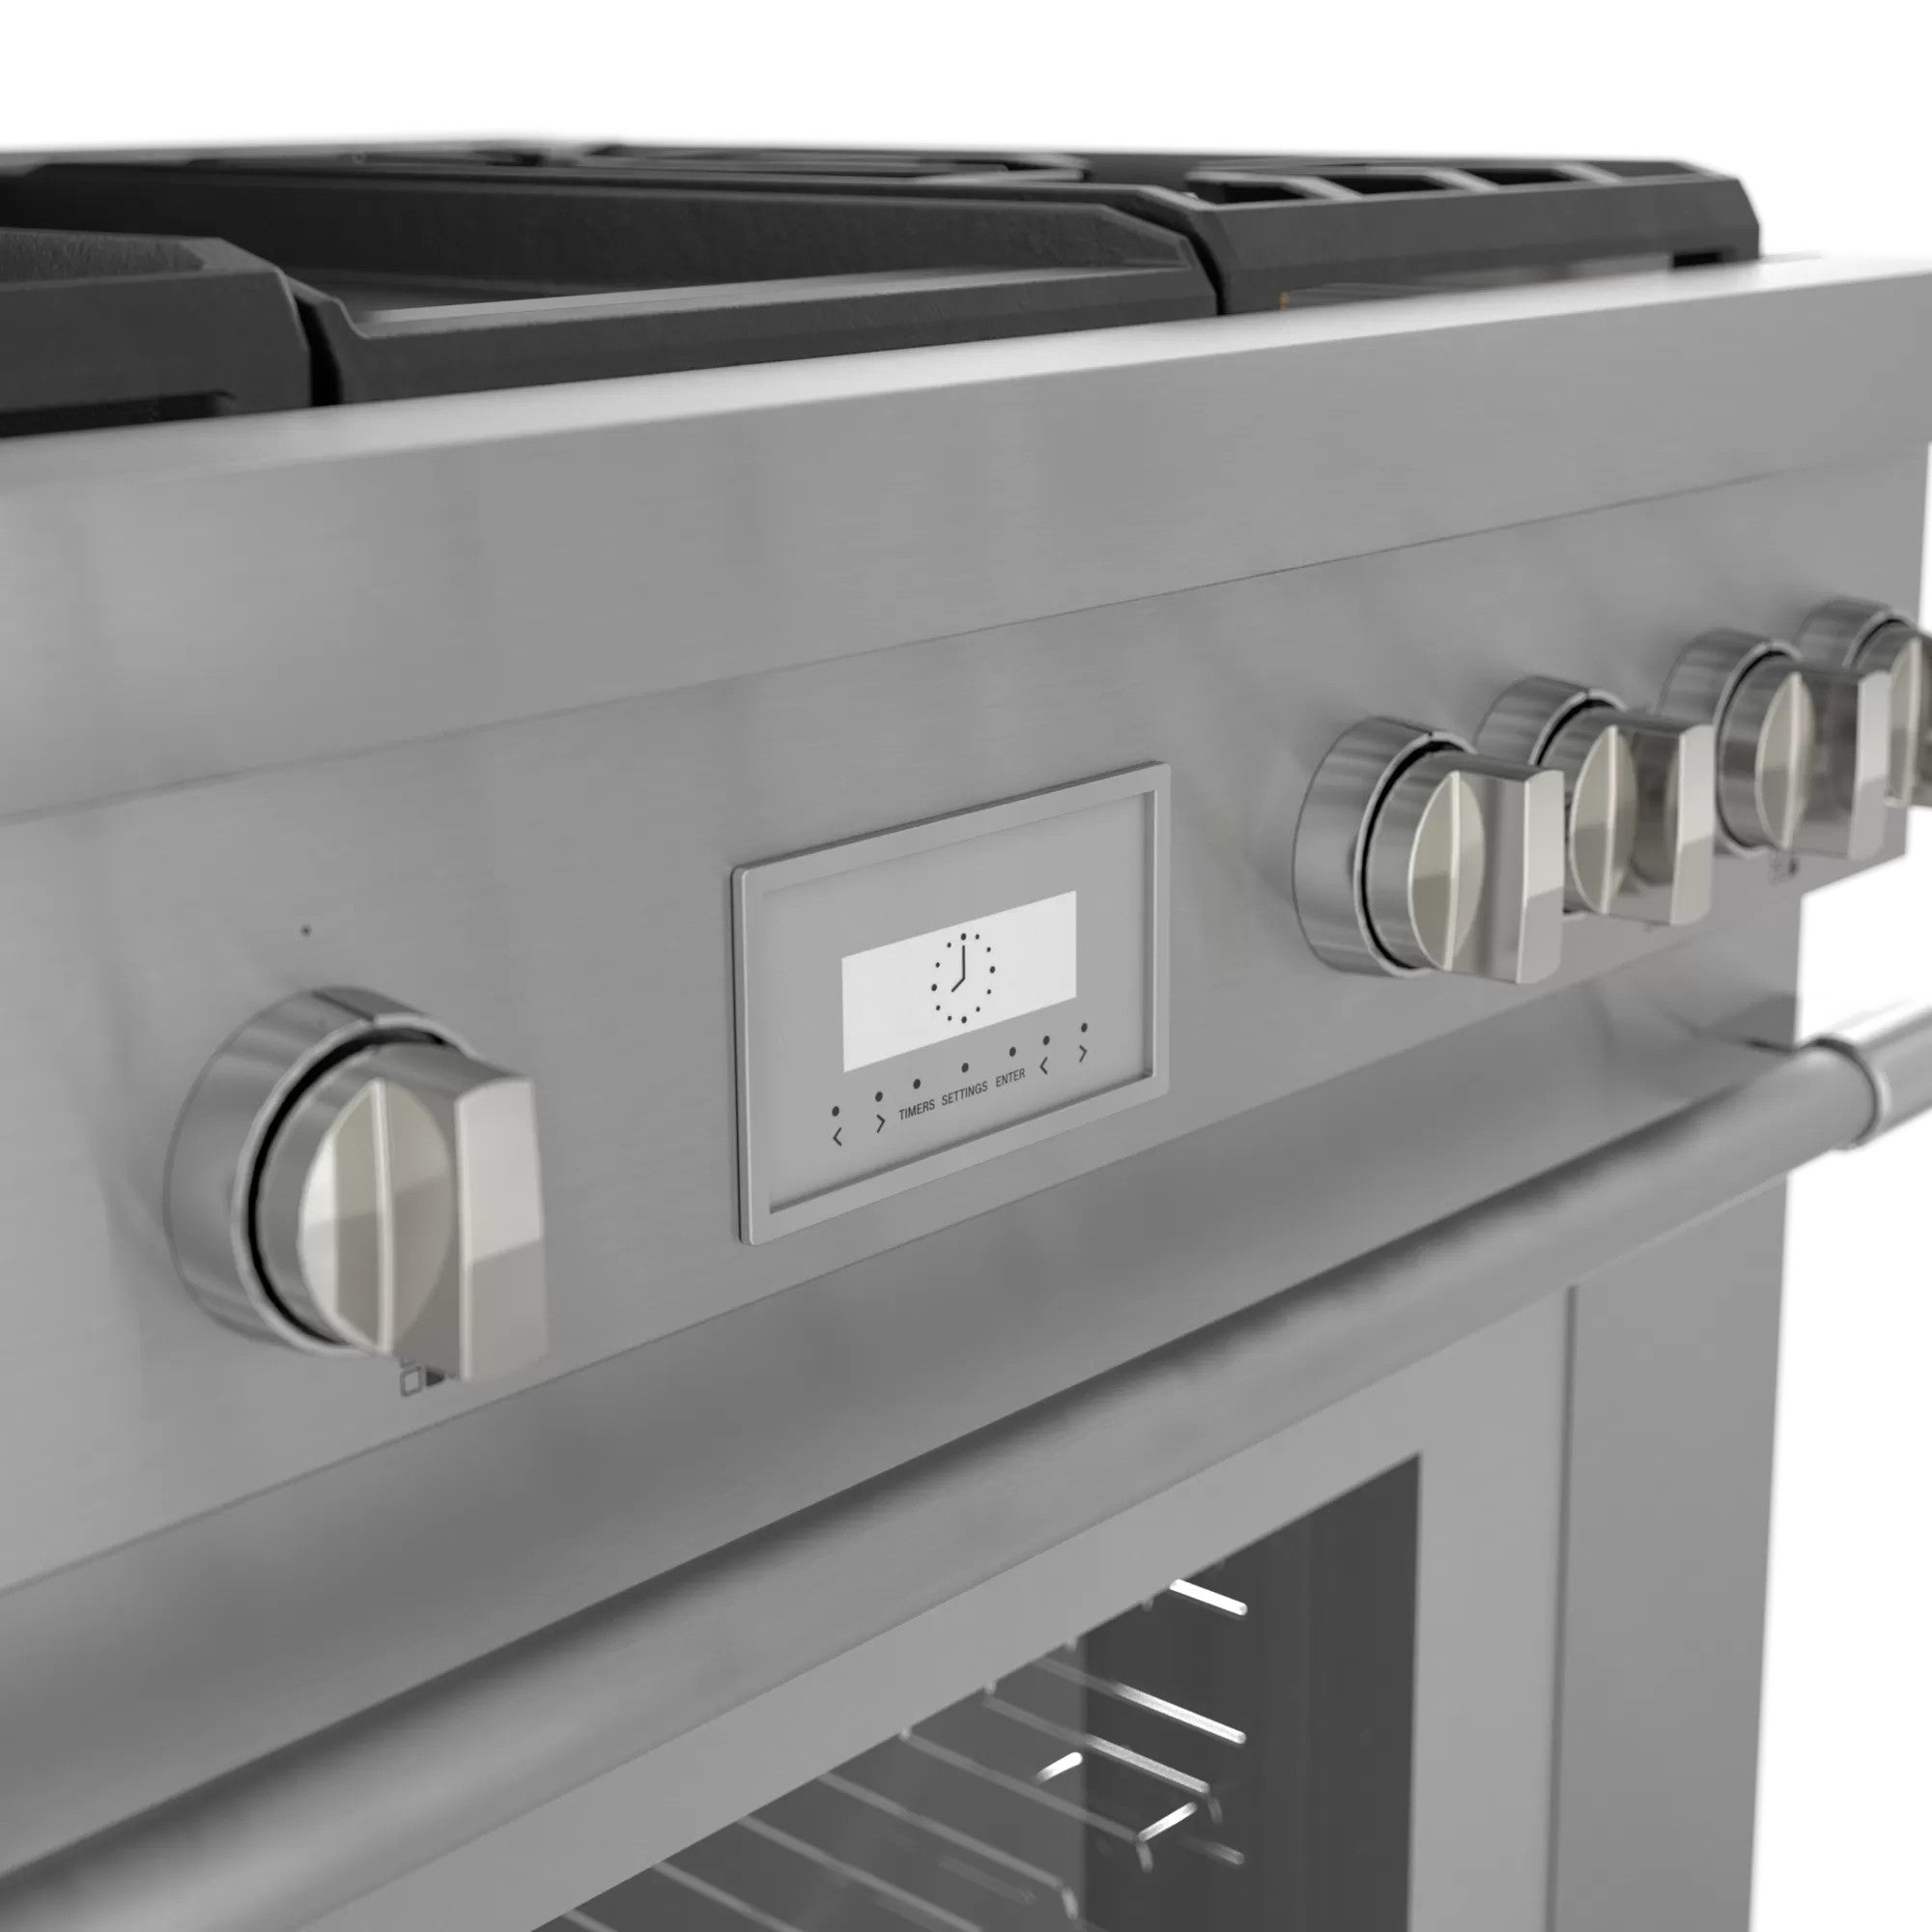 Thermador - 5.1 cu. ft  Gas Range in Stainless - PRG364WDH